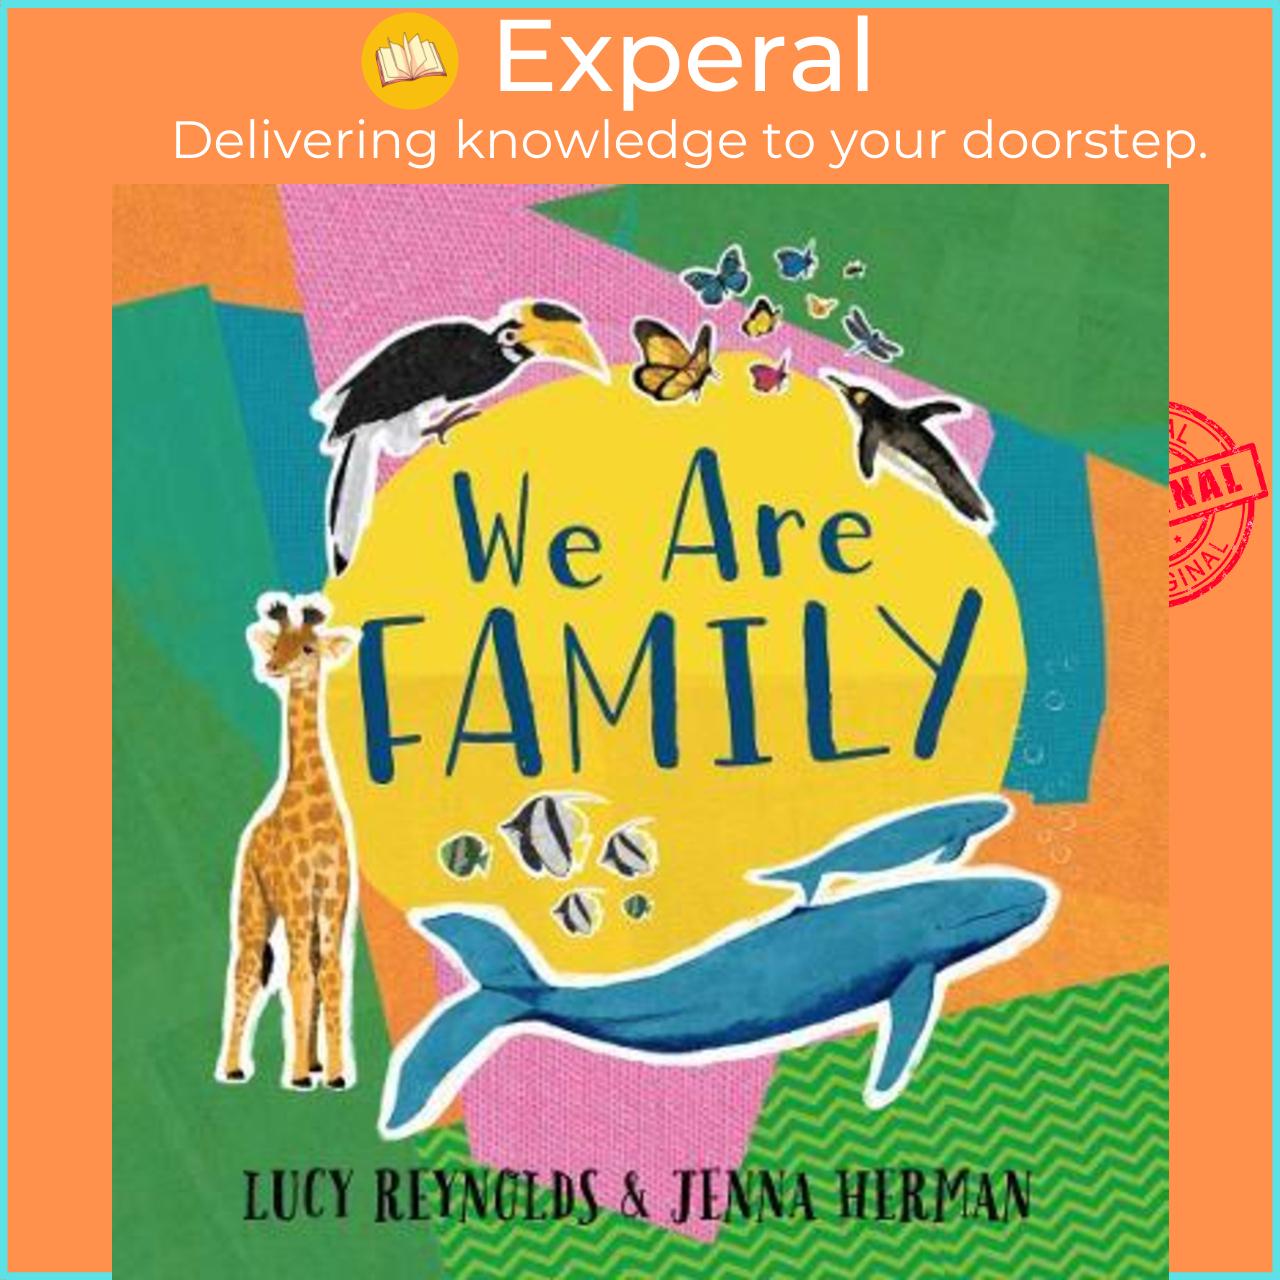 Sách - We Are Family by Lucy Reynolds,Jenna Herman (UK edition, hardcover)